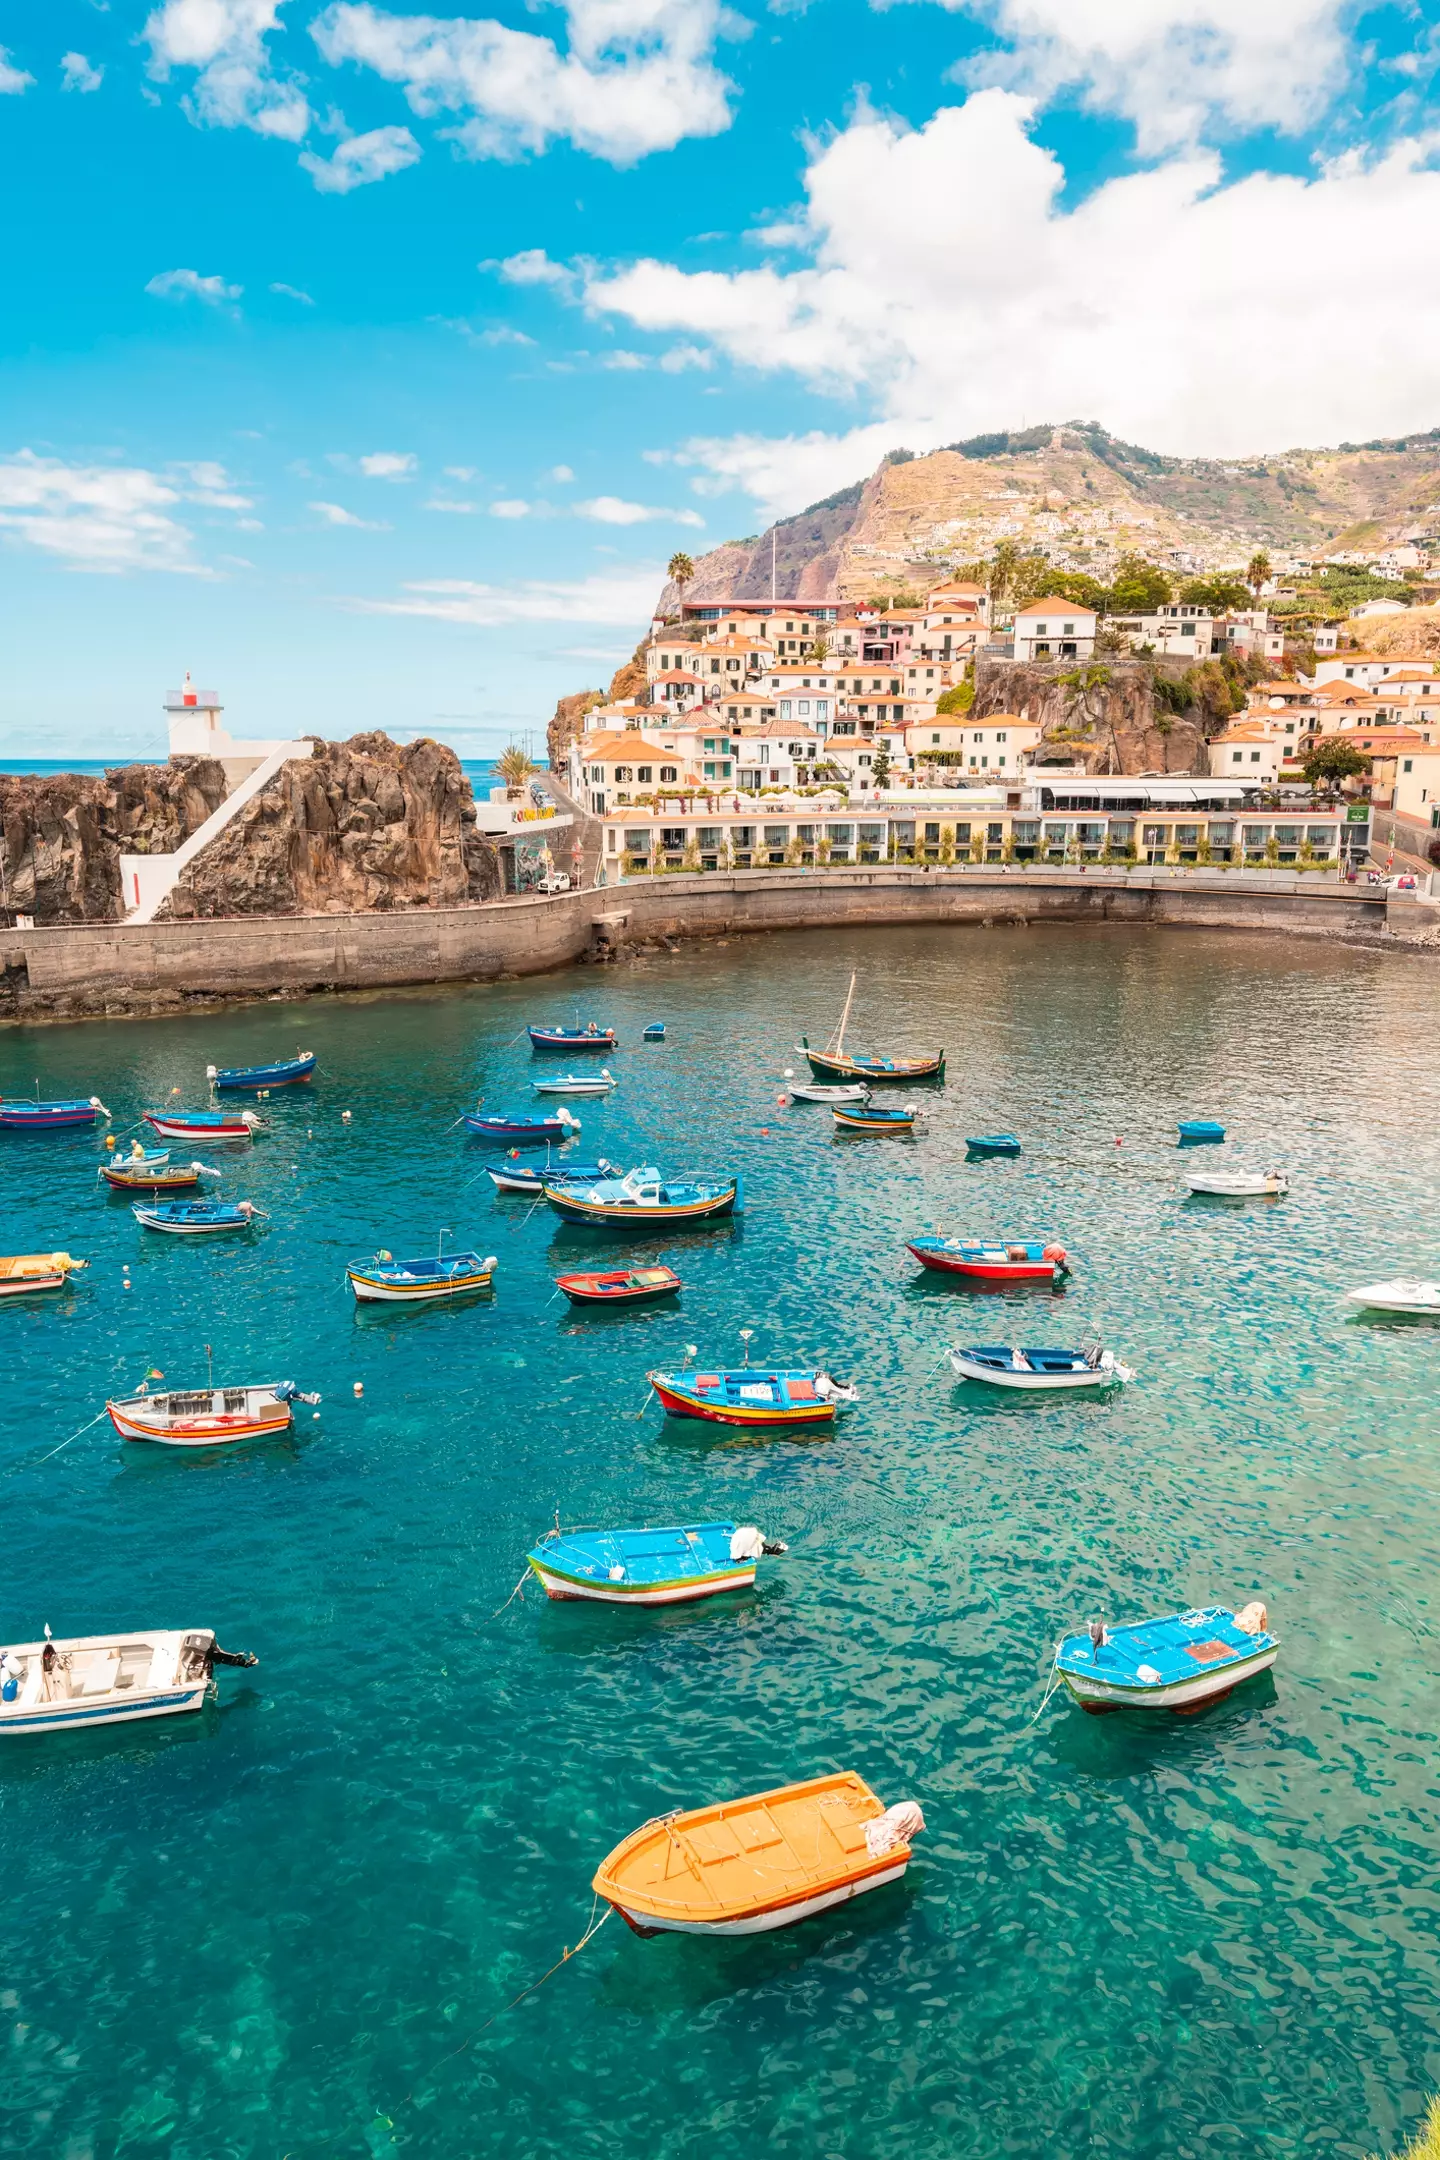 Moored boats in the harbour of Camara de Lobos, Madeira. (Getty Stock Images)